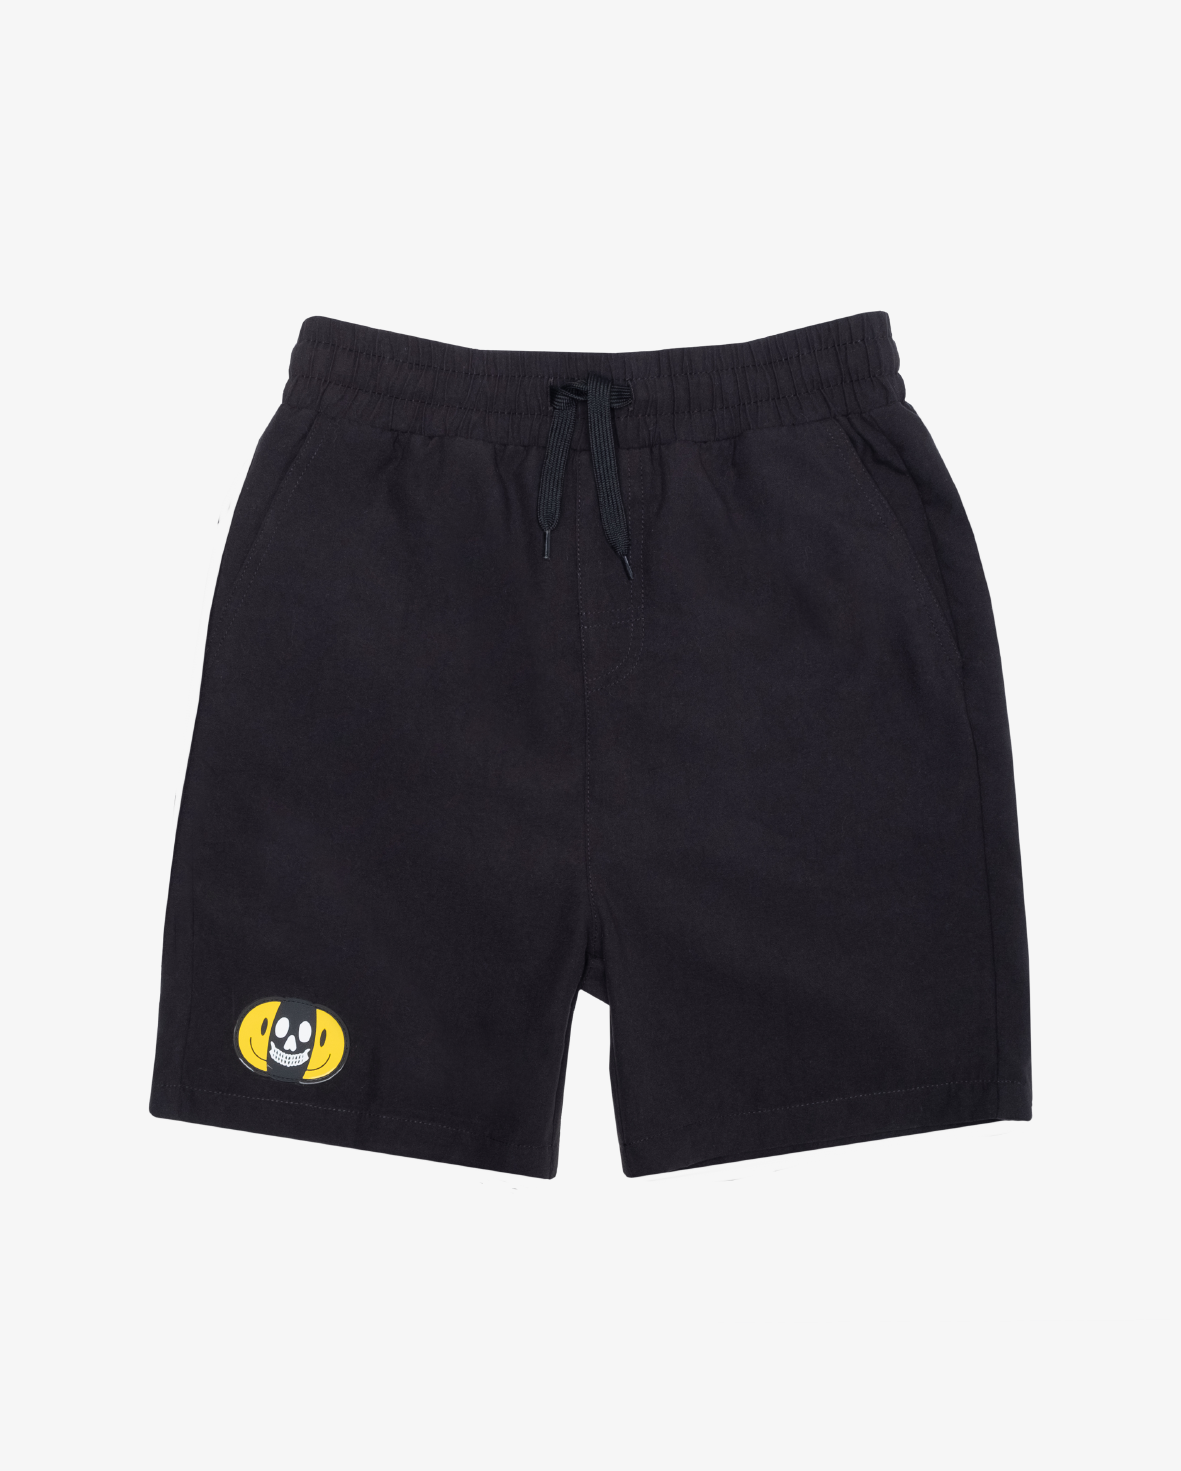 Band of Boys - Two Faced Black Boardies – Fox in Sox Kids